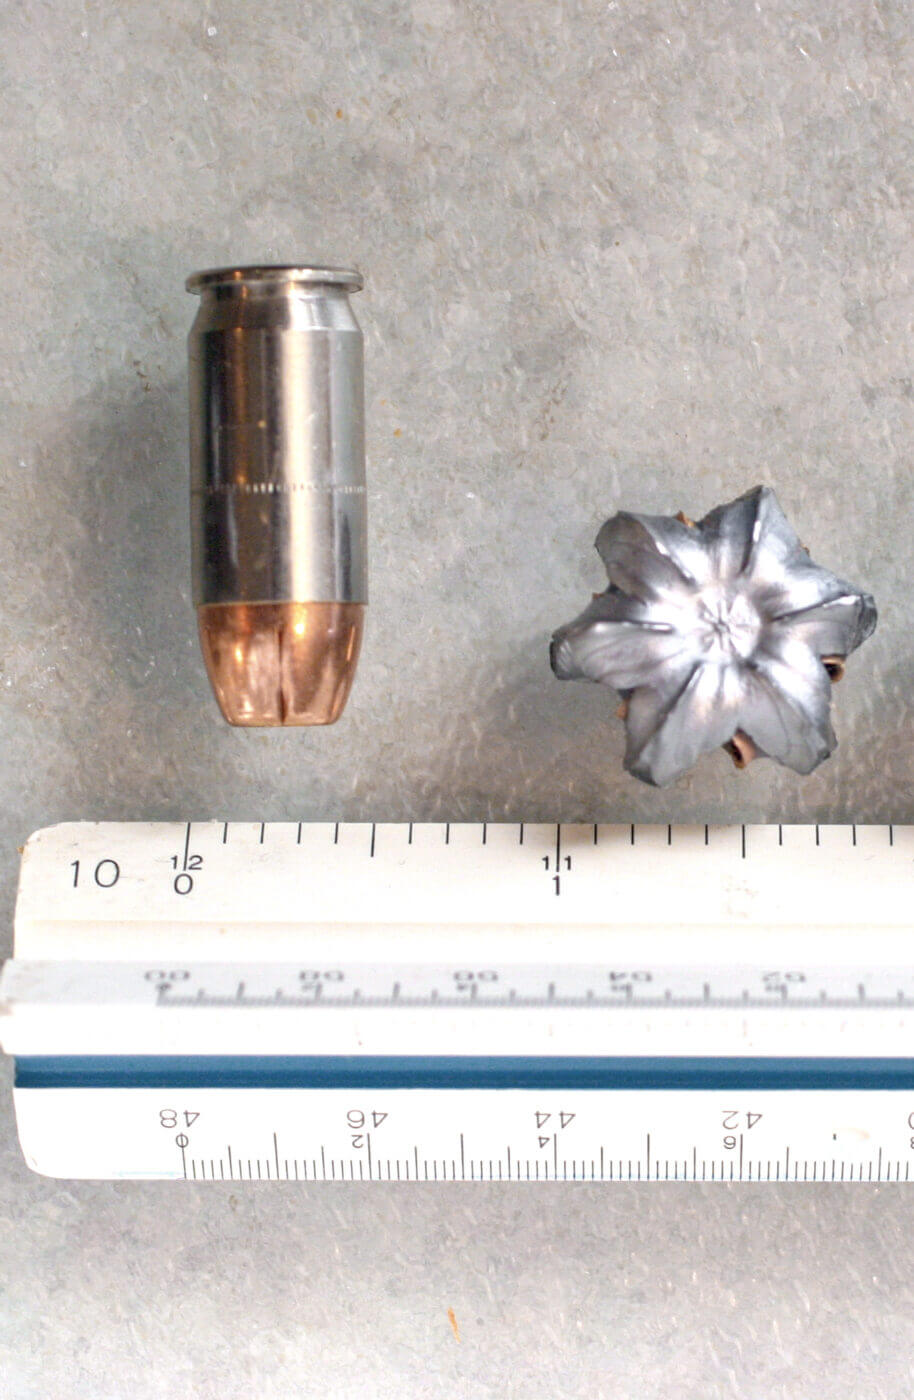 Expanded vs. unexpanded Federal HST bullet